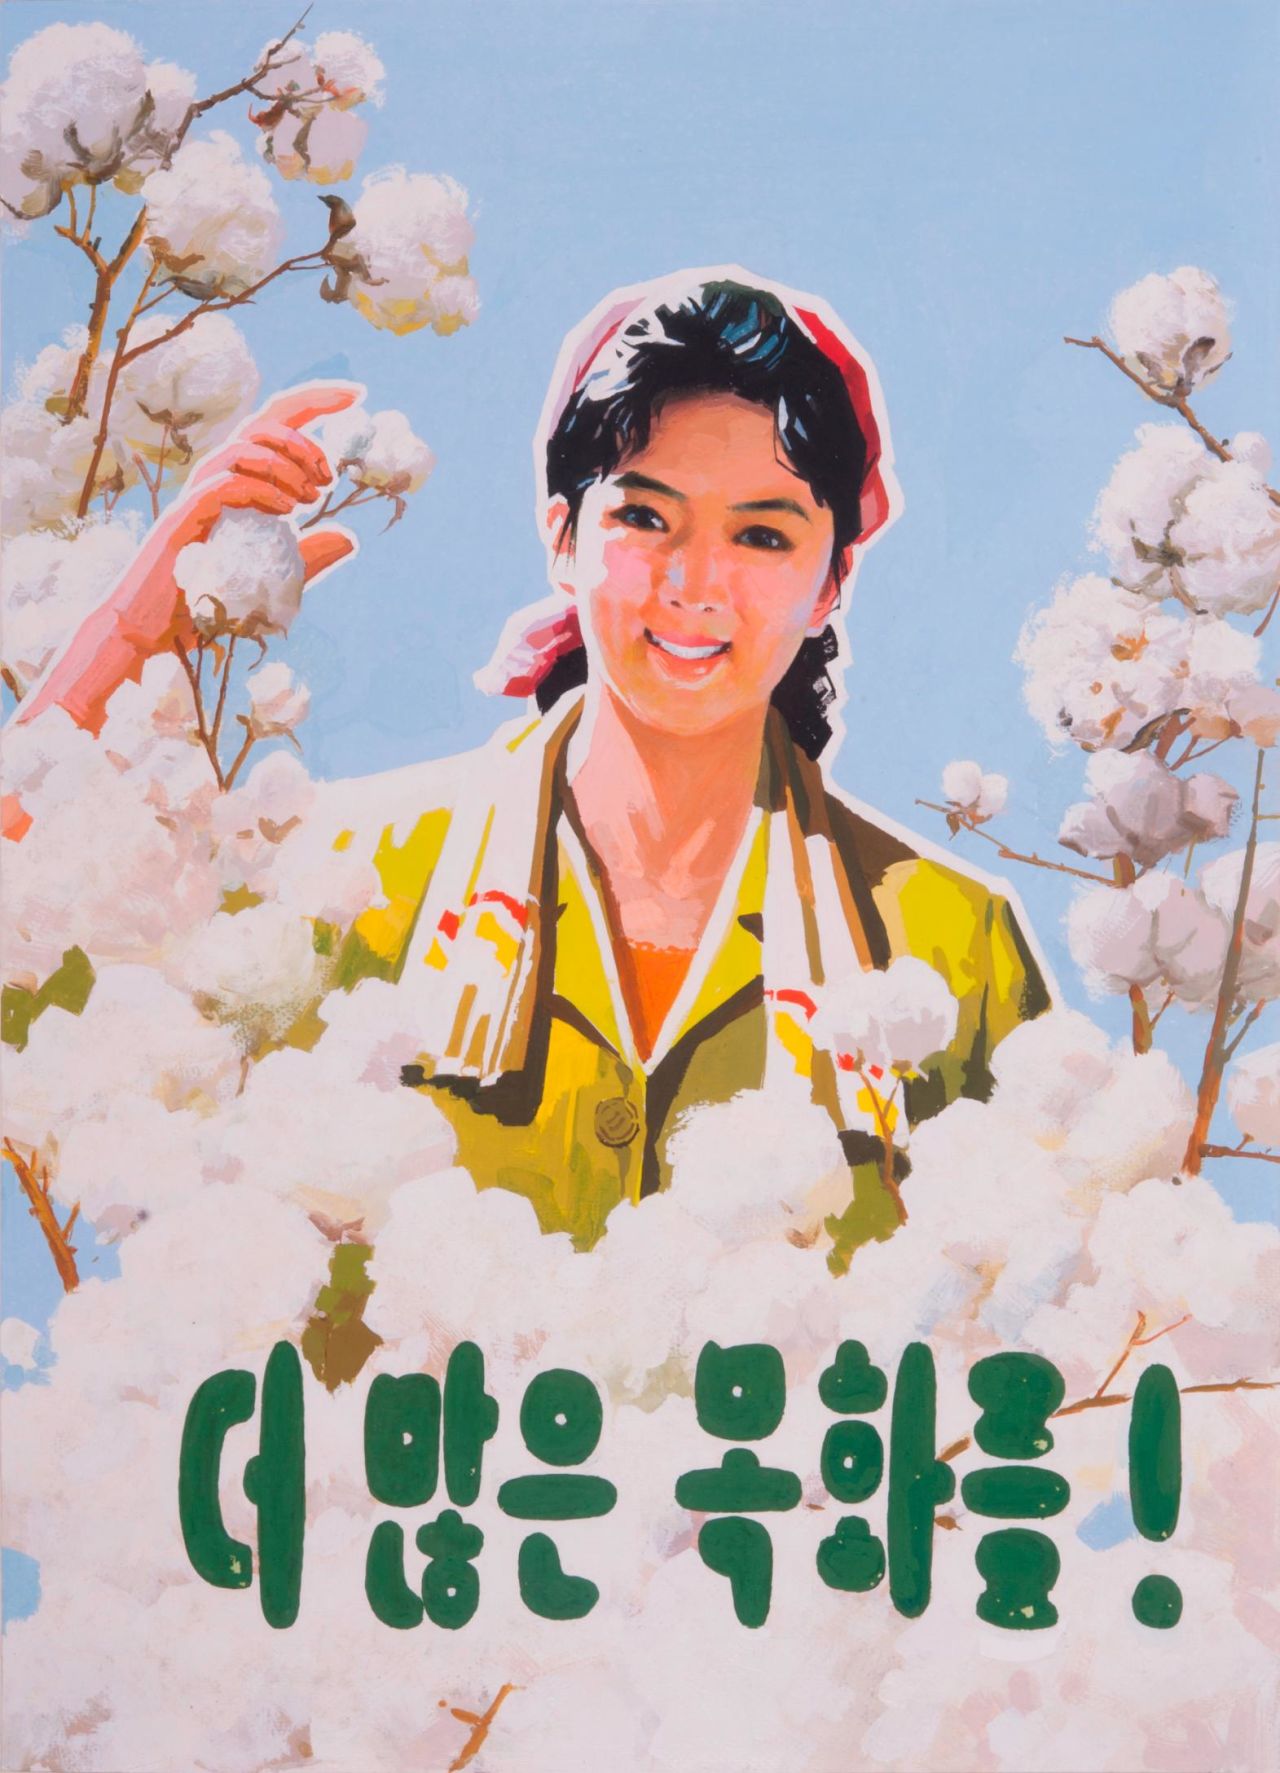 The message is often simple and direct, such as this poster calling for "more cotton!"